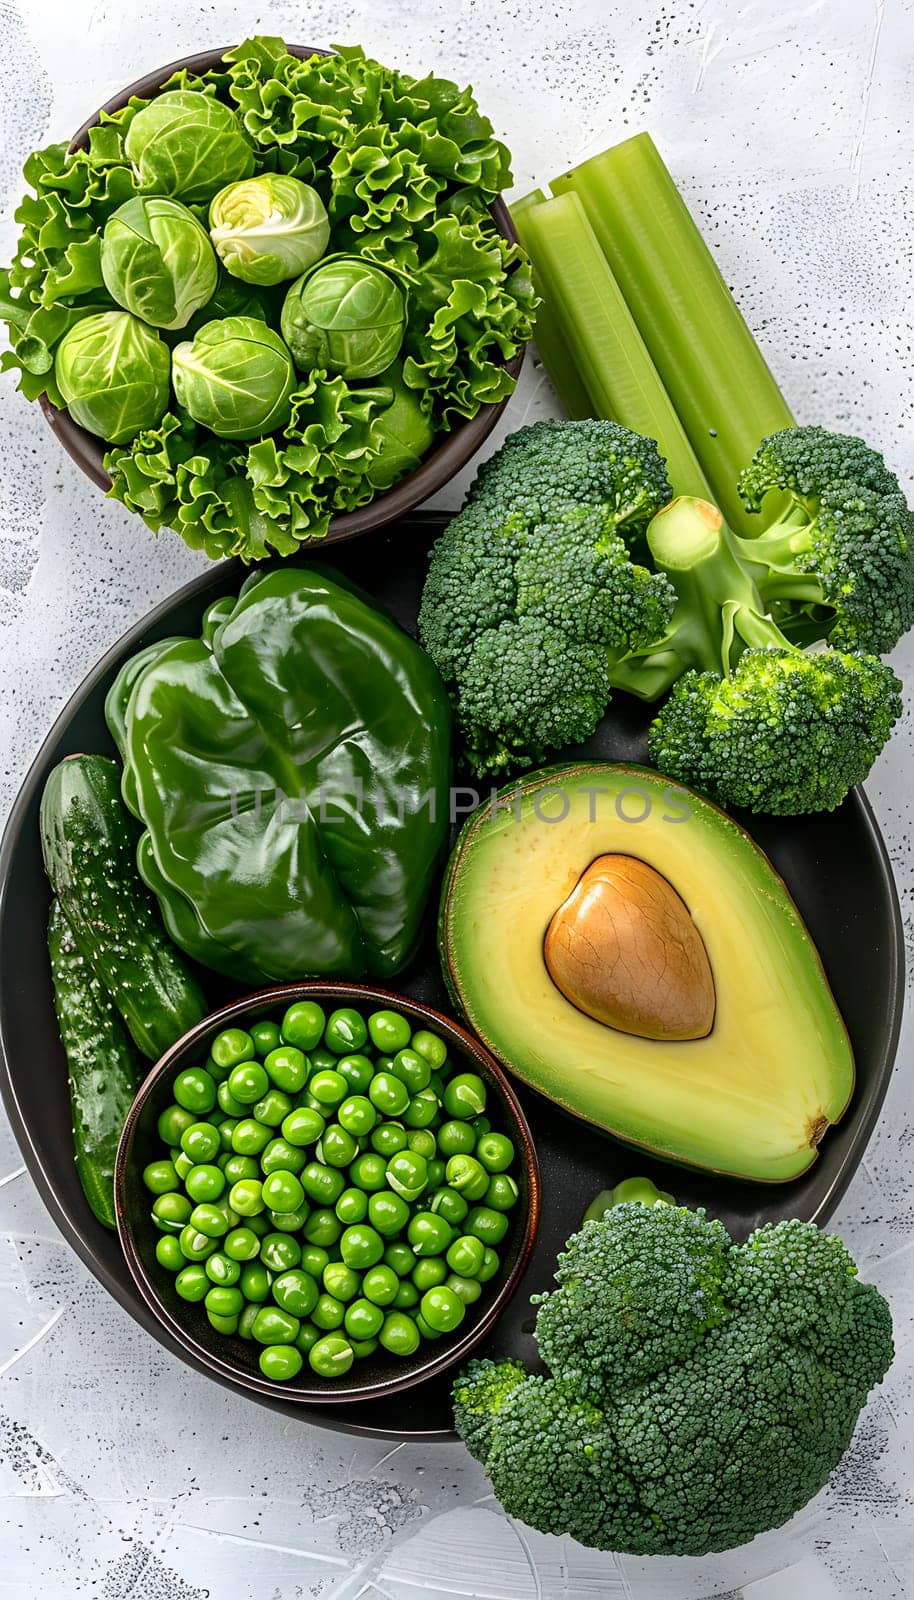 A variety of green vegetables, such as broccoli and leafy greens, are showcased on a plate. These natural foods can be ingredients in many delicious cuisine recipes